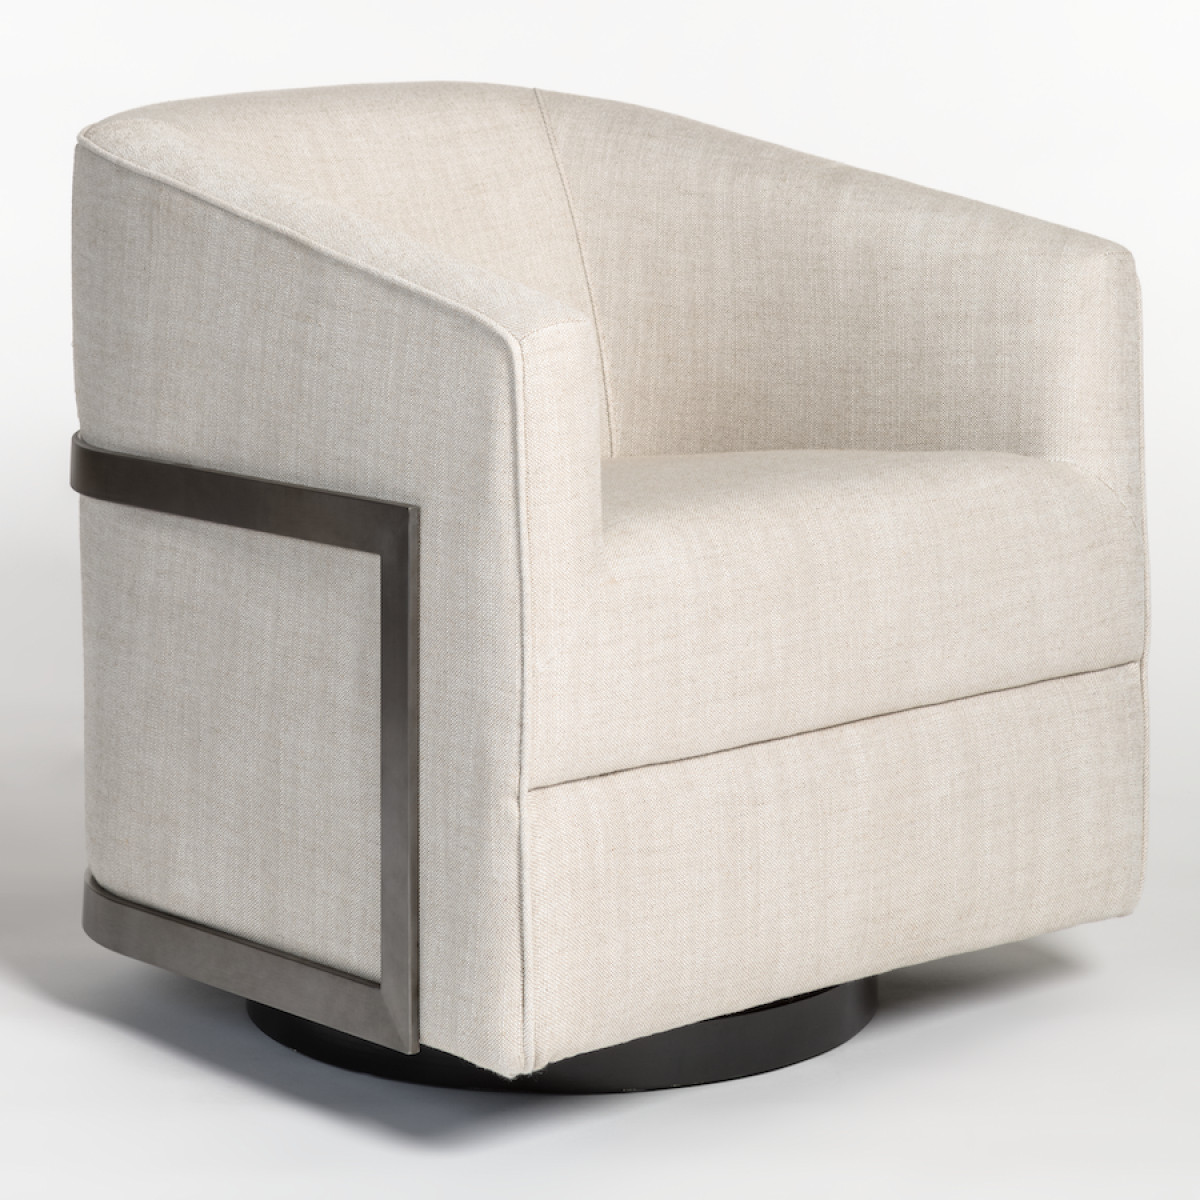 Shop Blaine Occasional Swivel Chair In Everest Frost And Blackened Nickel from DiMare Design on Openhaus